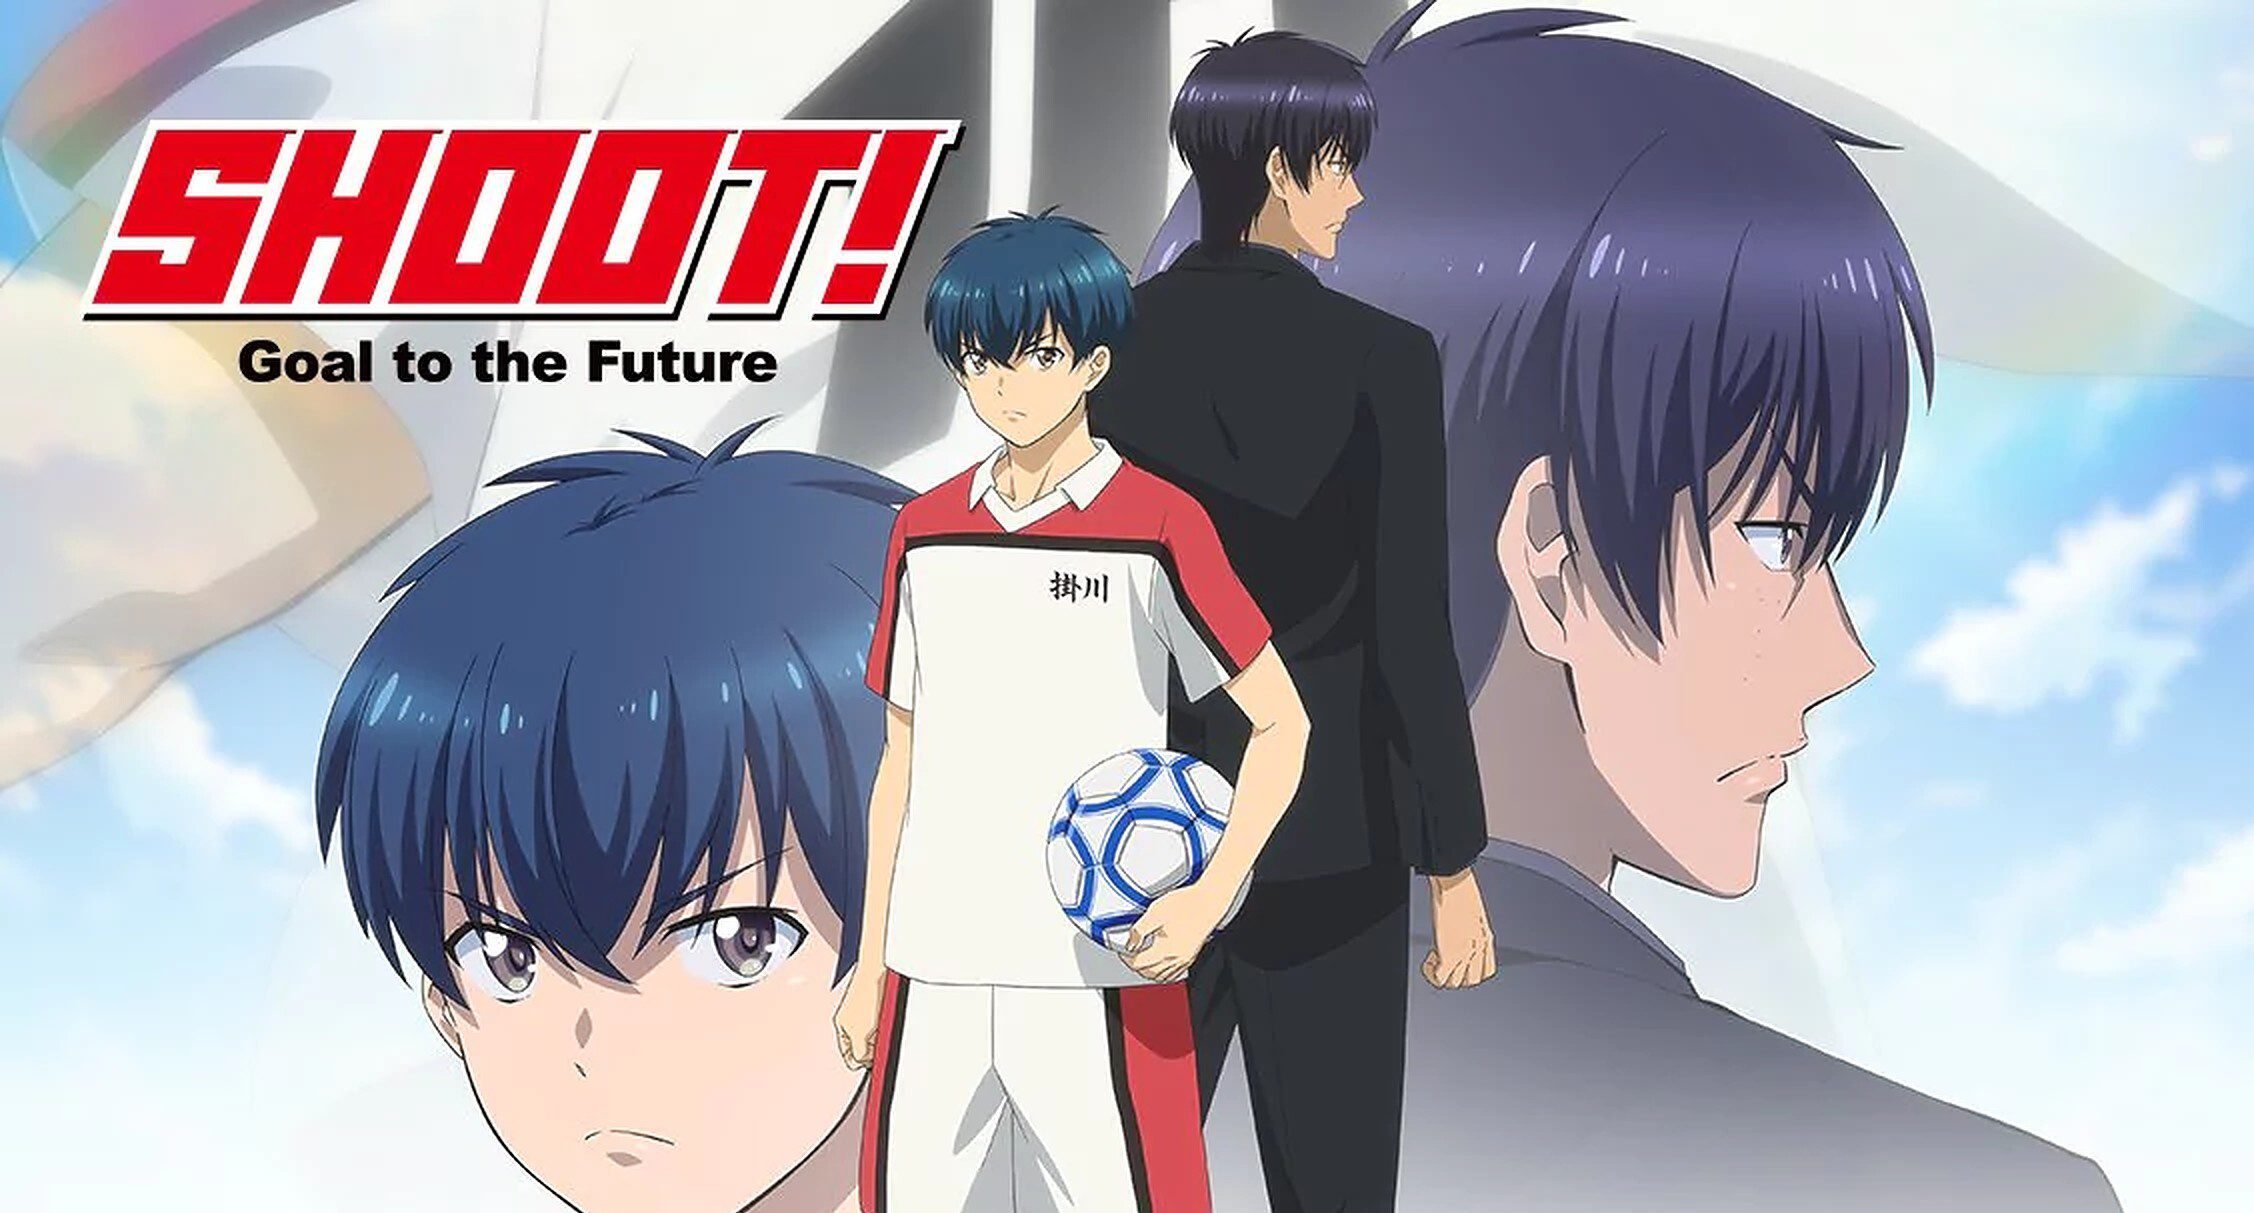 Shoot! Goal to the Future Episode 6 Release Date